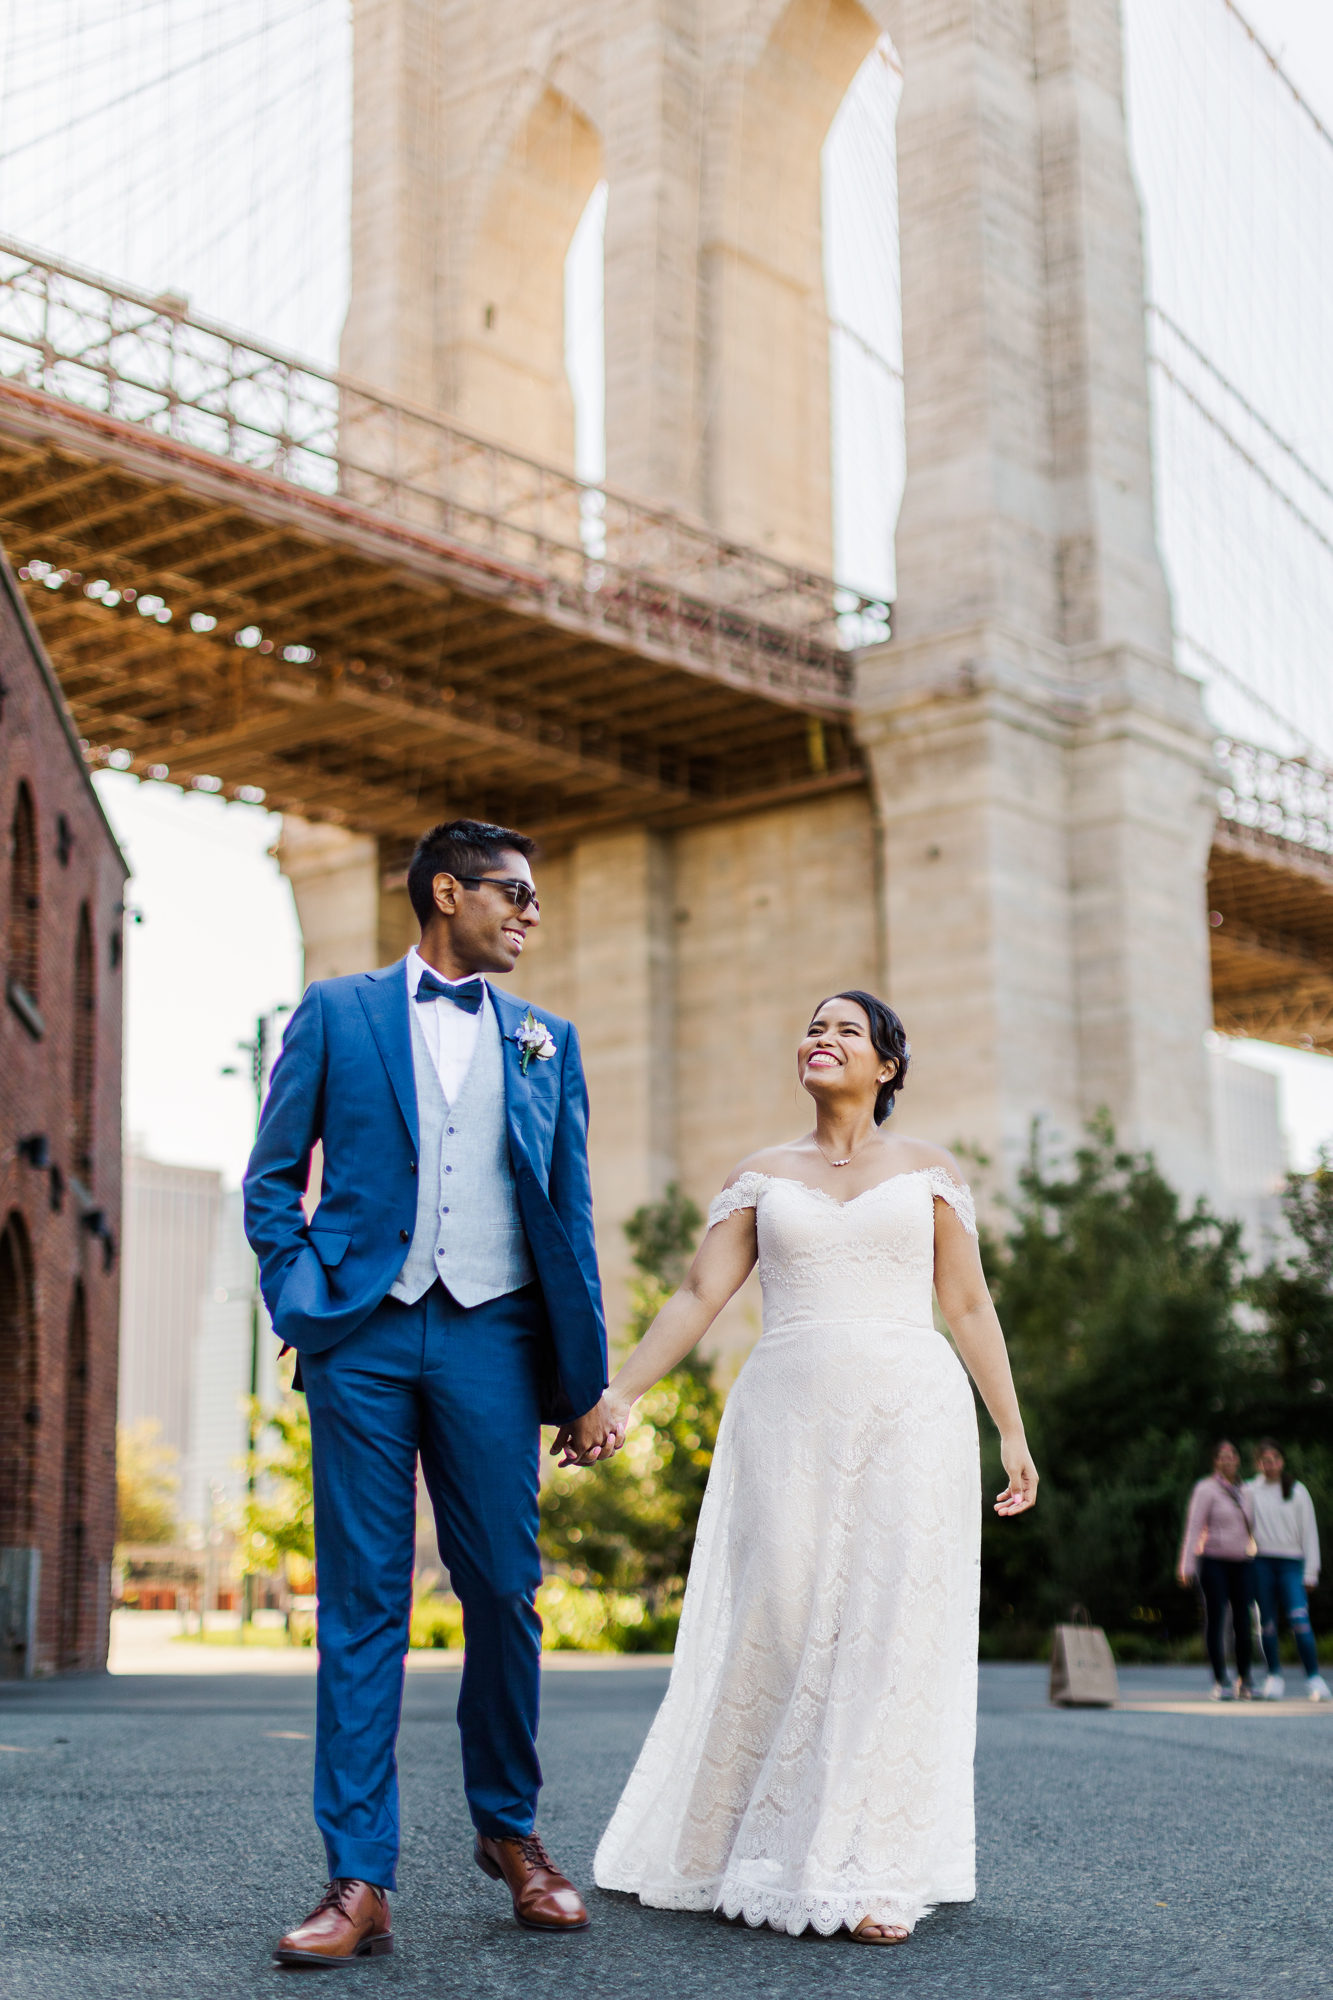 Best Restaurants to Eat at After a Stunning DUMBO Elopement